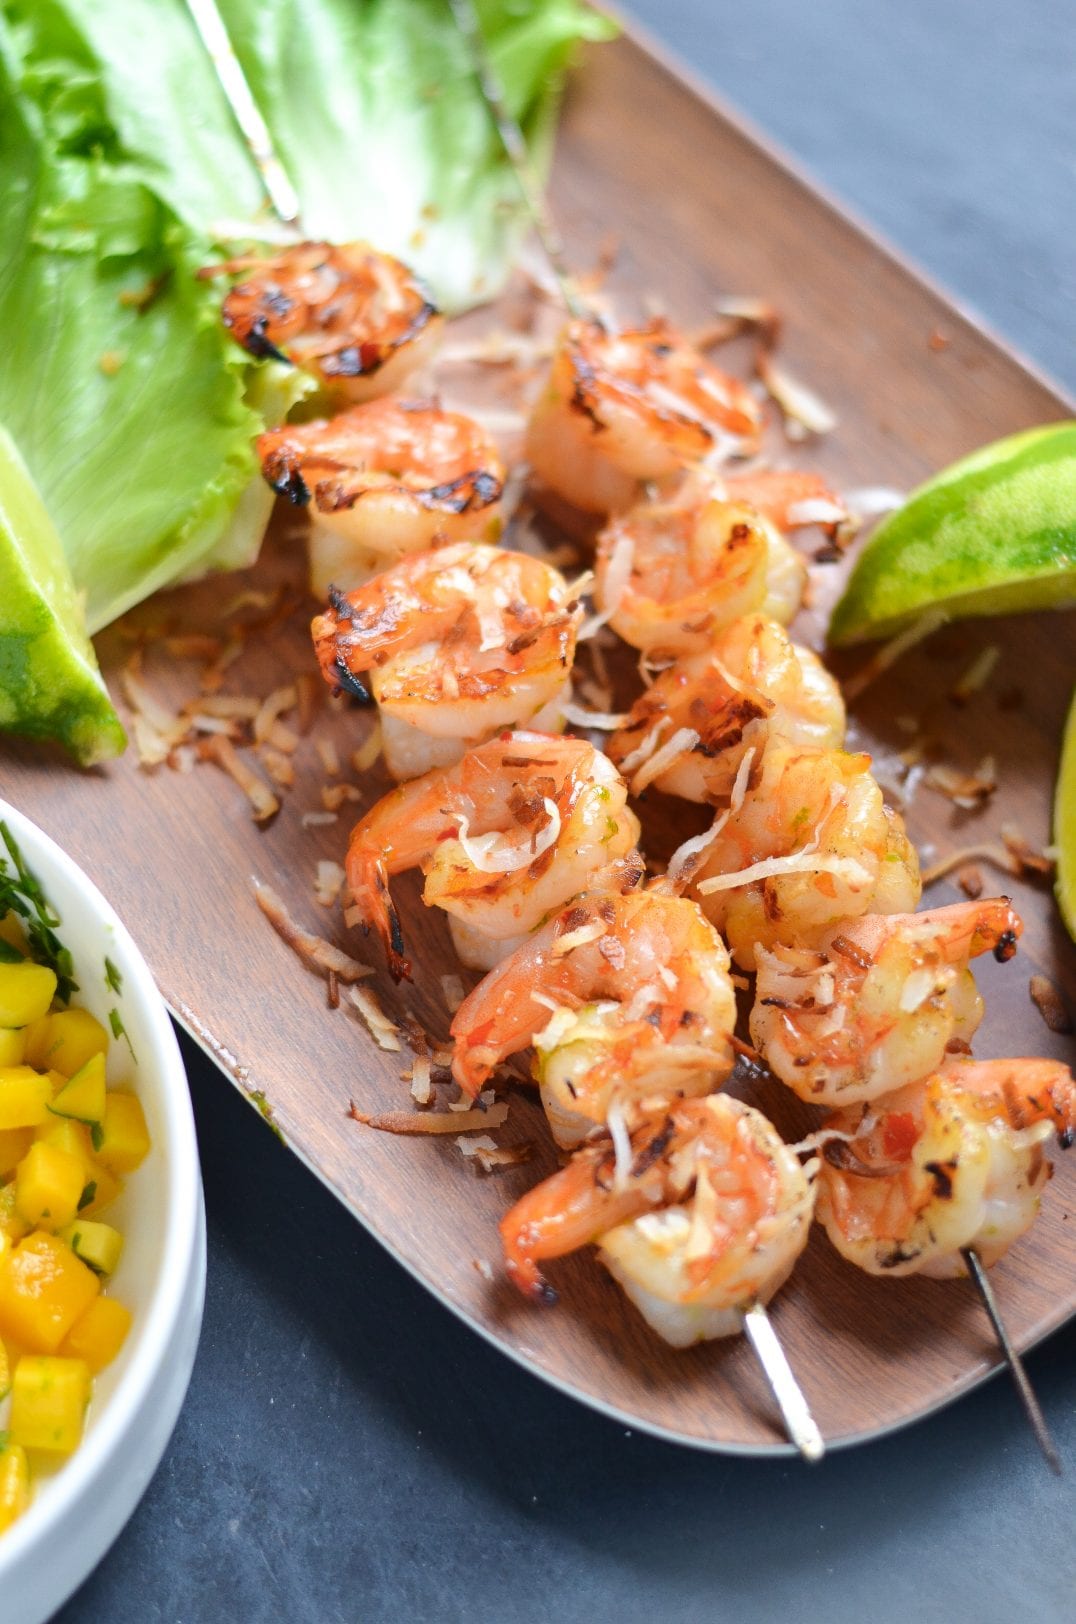 Grilled Shrimp Lettuce Wraps with Sweet Chili Sauce, Mango, and Toasted Coconut